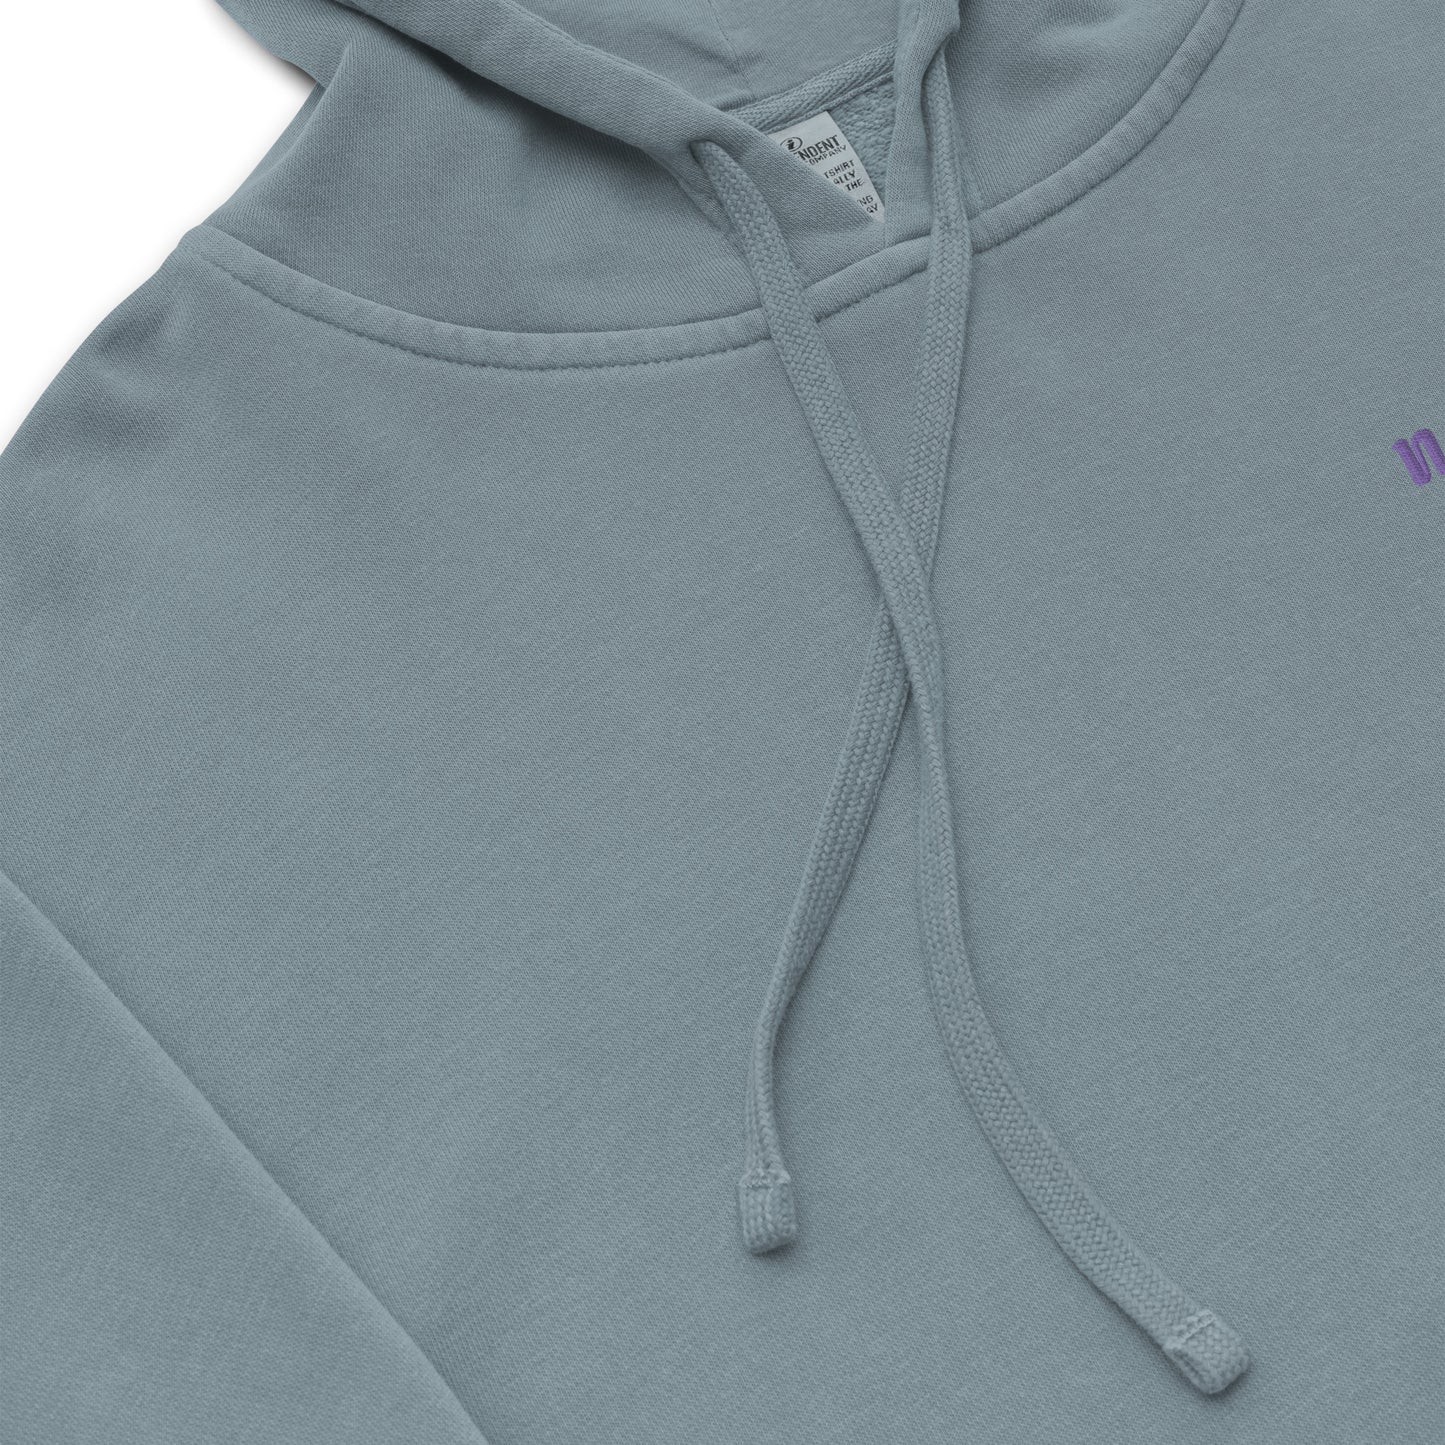 NYC Embroidered - Unisex pigment-dyed hoodie